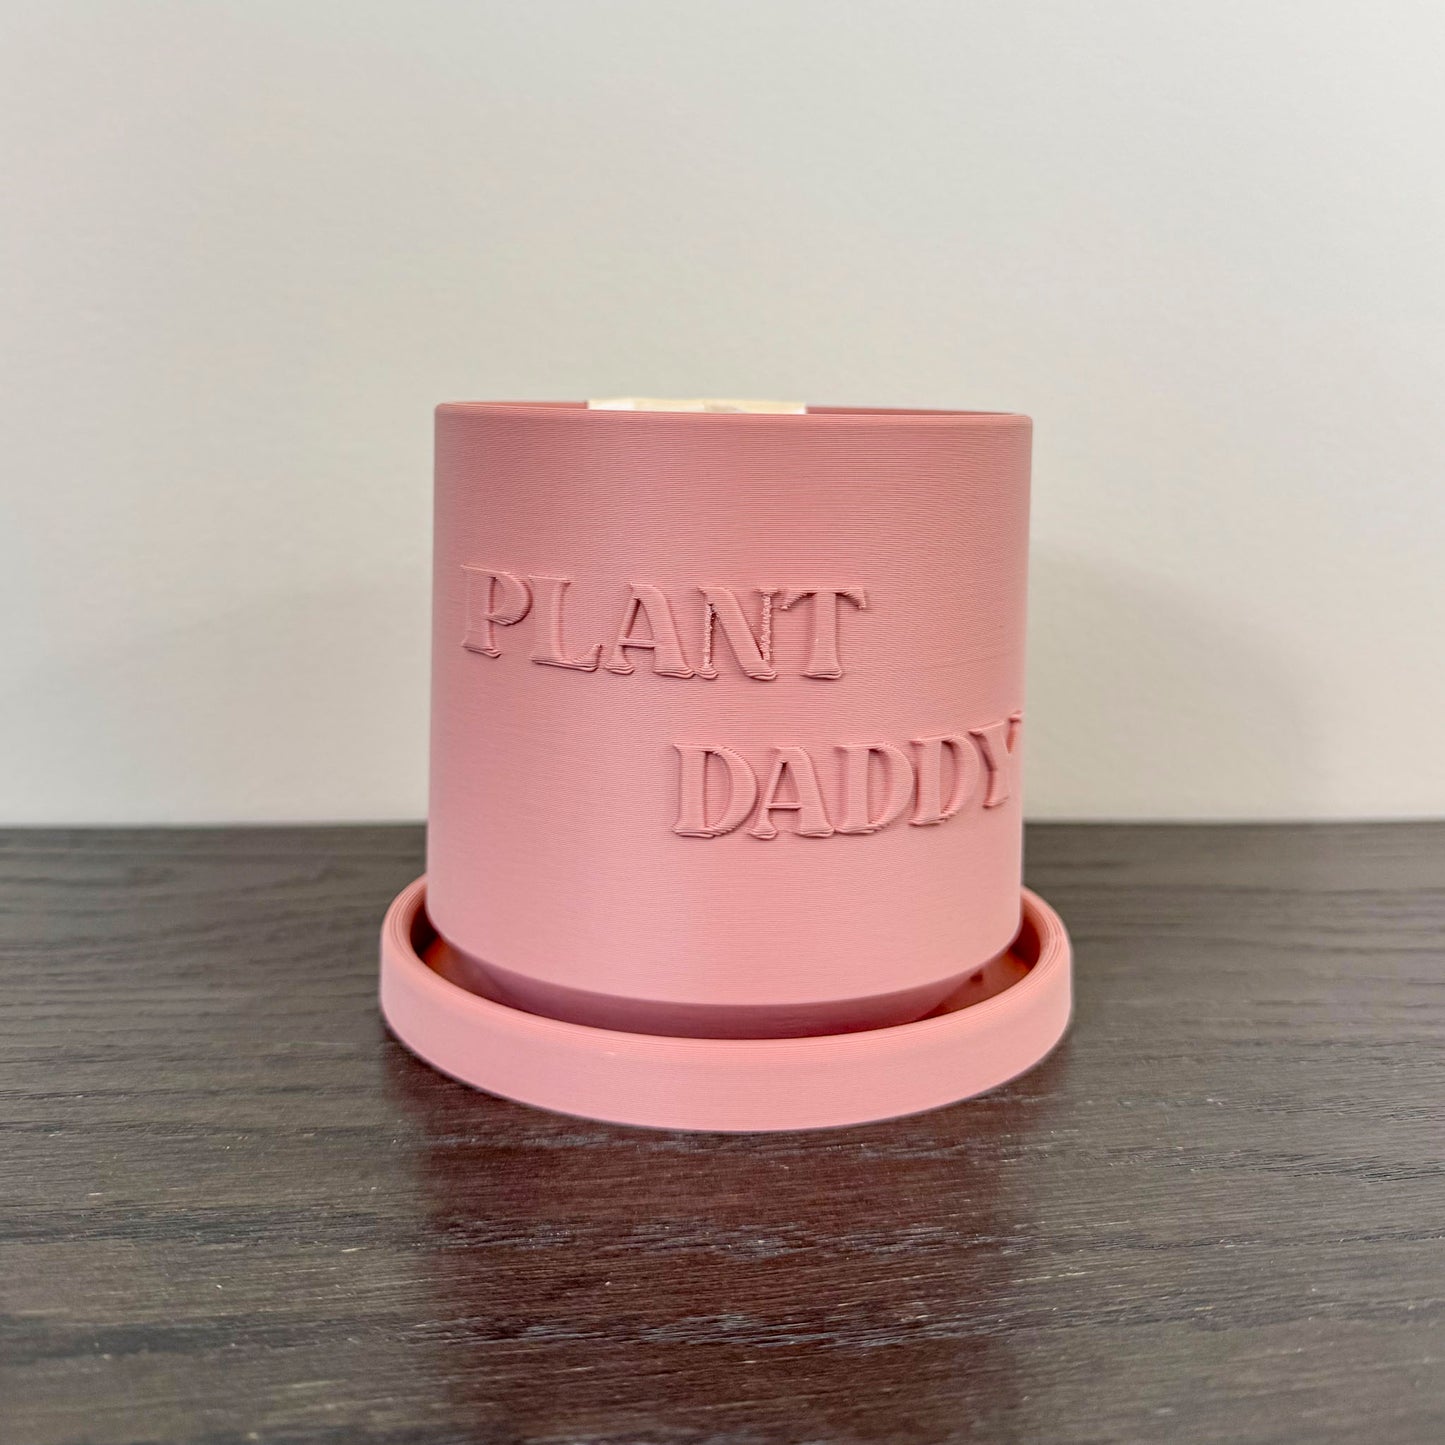 Terracotta 3D printed plant daddy planter